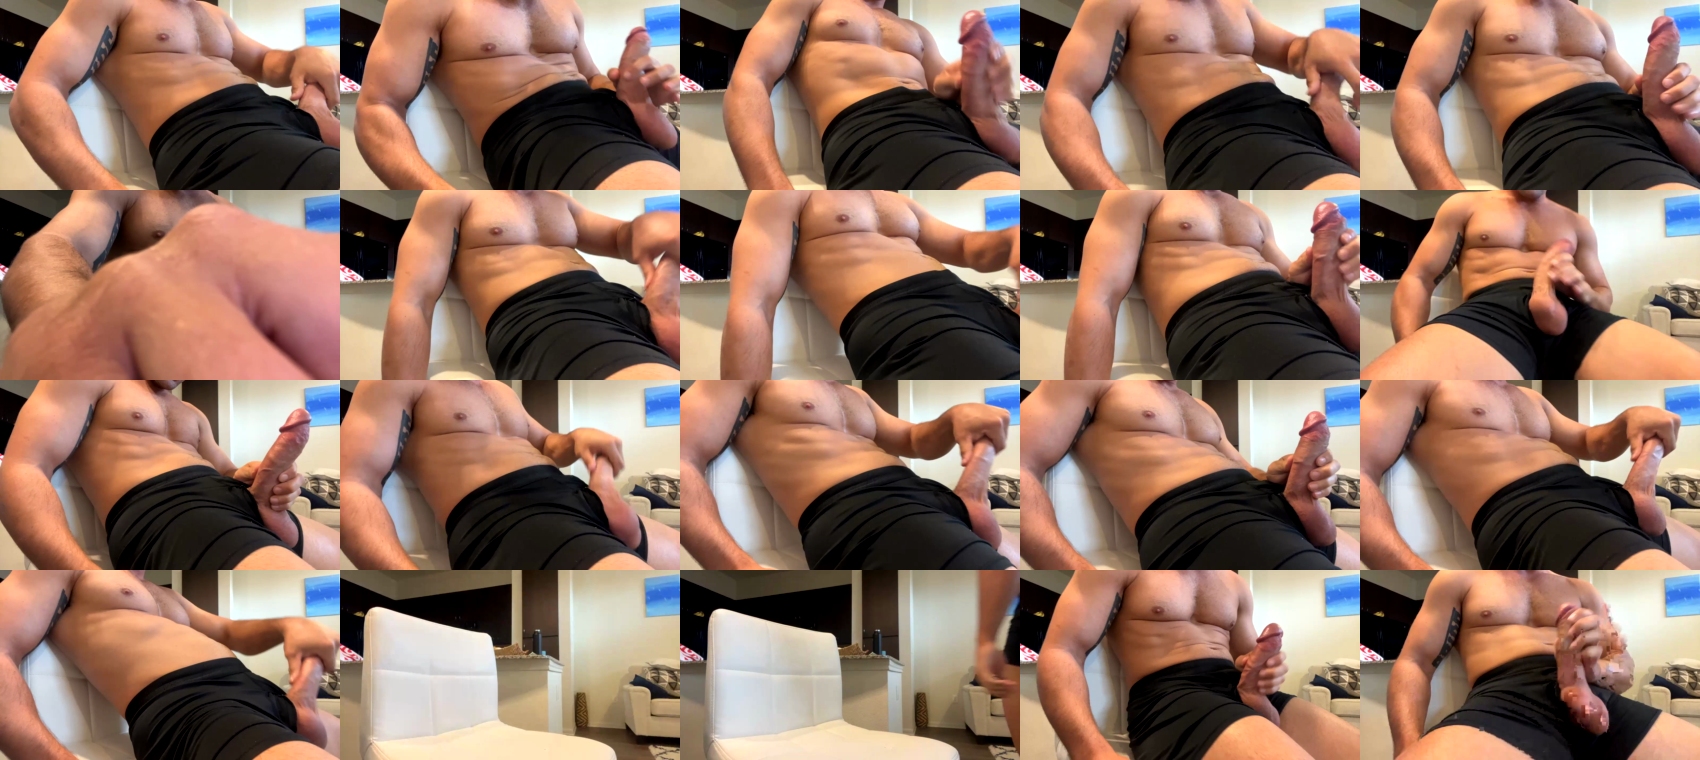 damnimhandsome25 sexybody CAM SHOW @ Chaturbate 20-11-2022